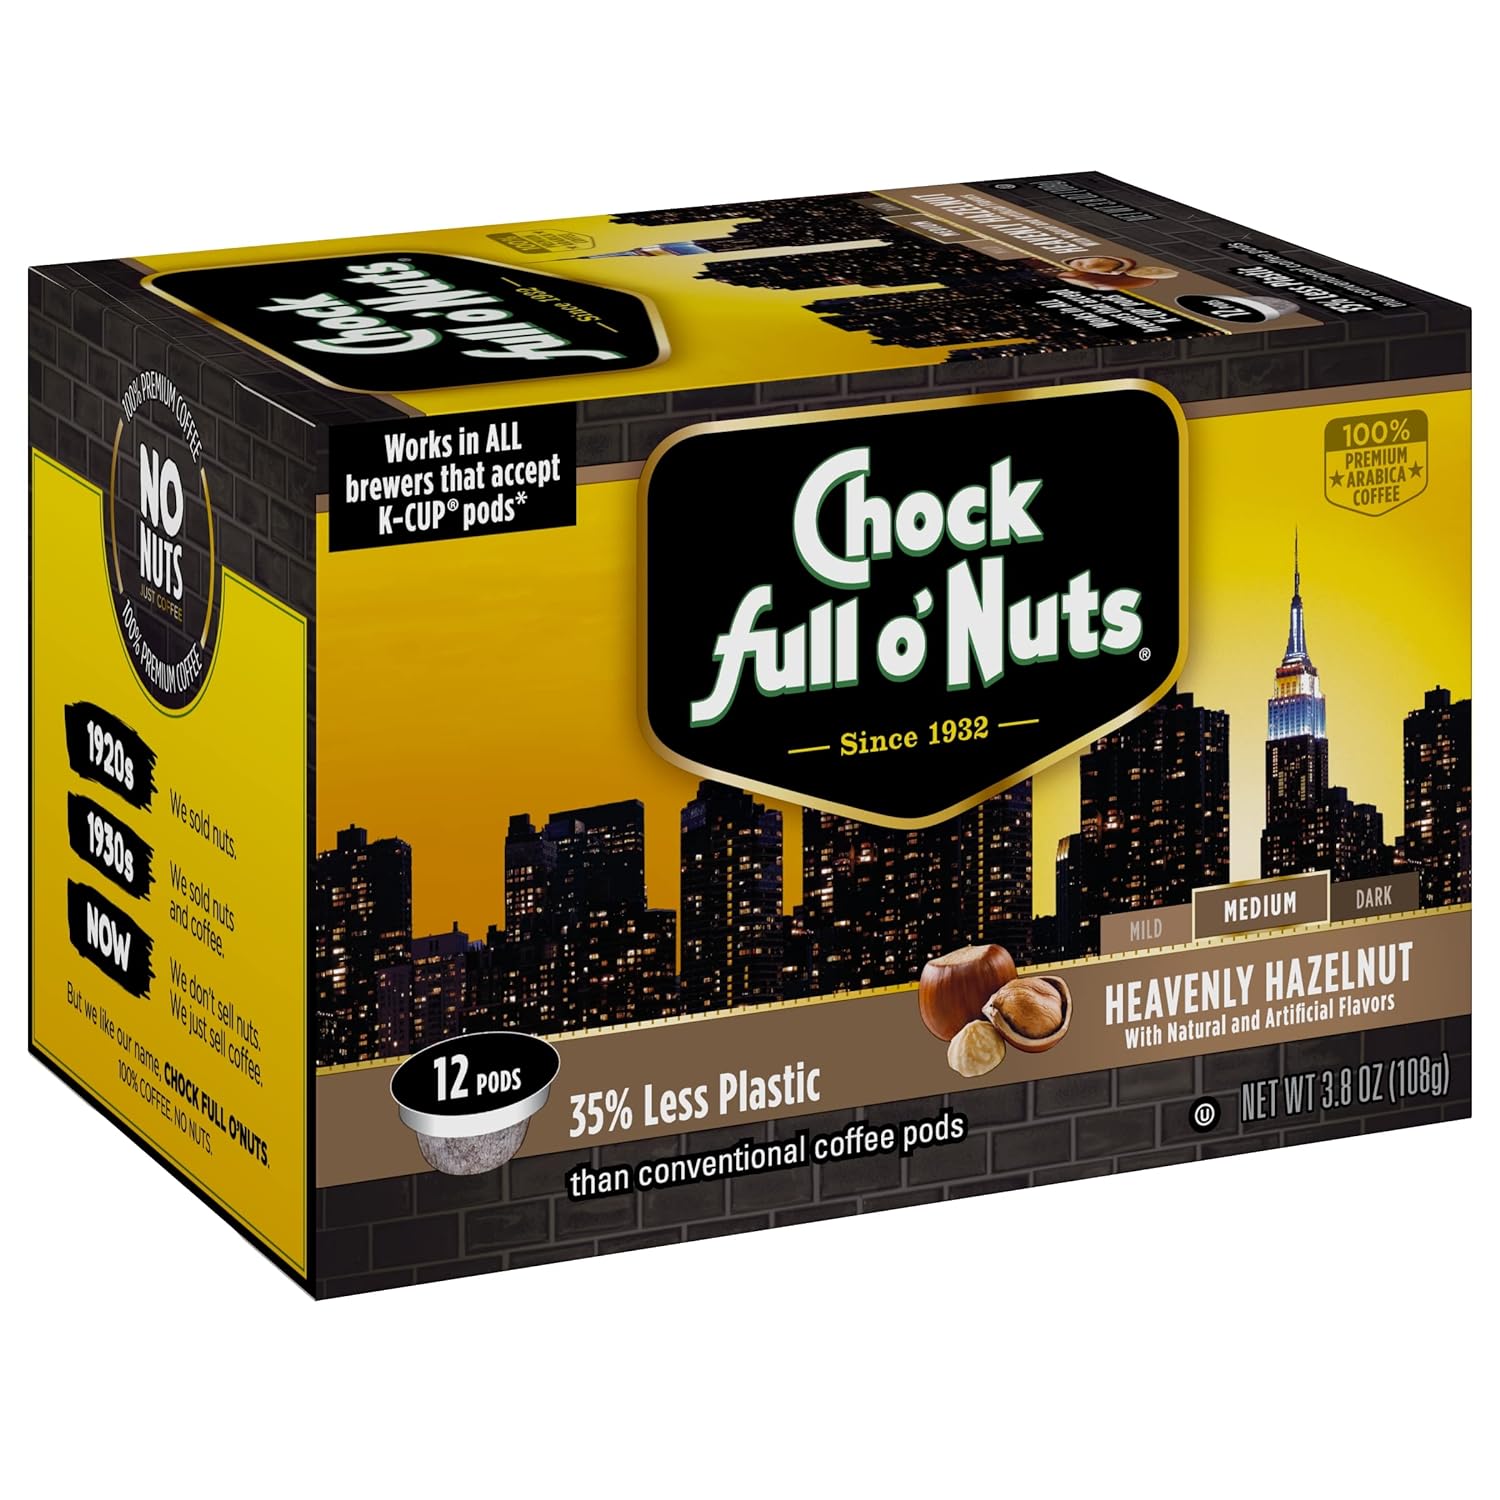 Chock Full o’Nuts Heavenly Hazelnut Medium Roast, K-Cup Compatible Pods (12 Count) - Arabica Coffee in Eco-Friendly Keurig-Compatible Single Serve Cups